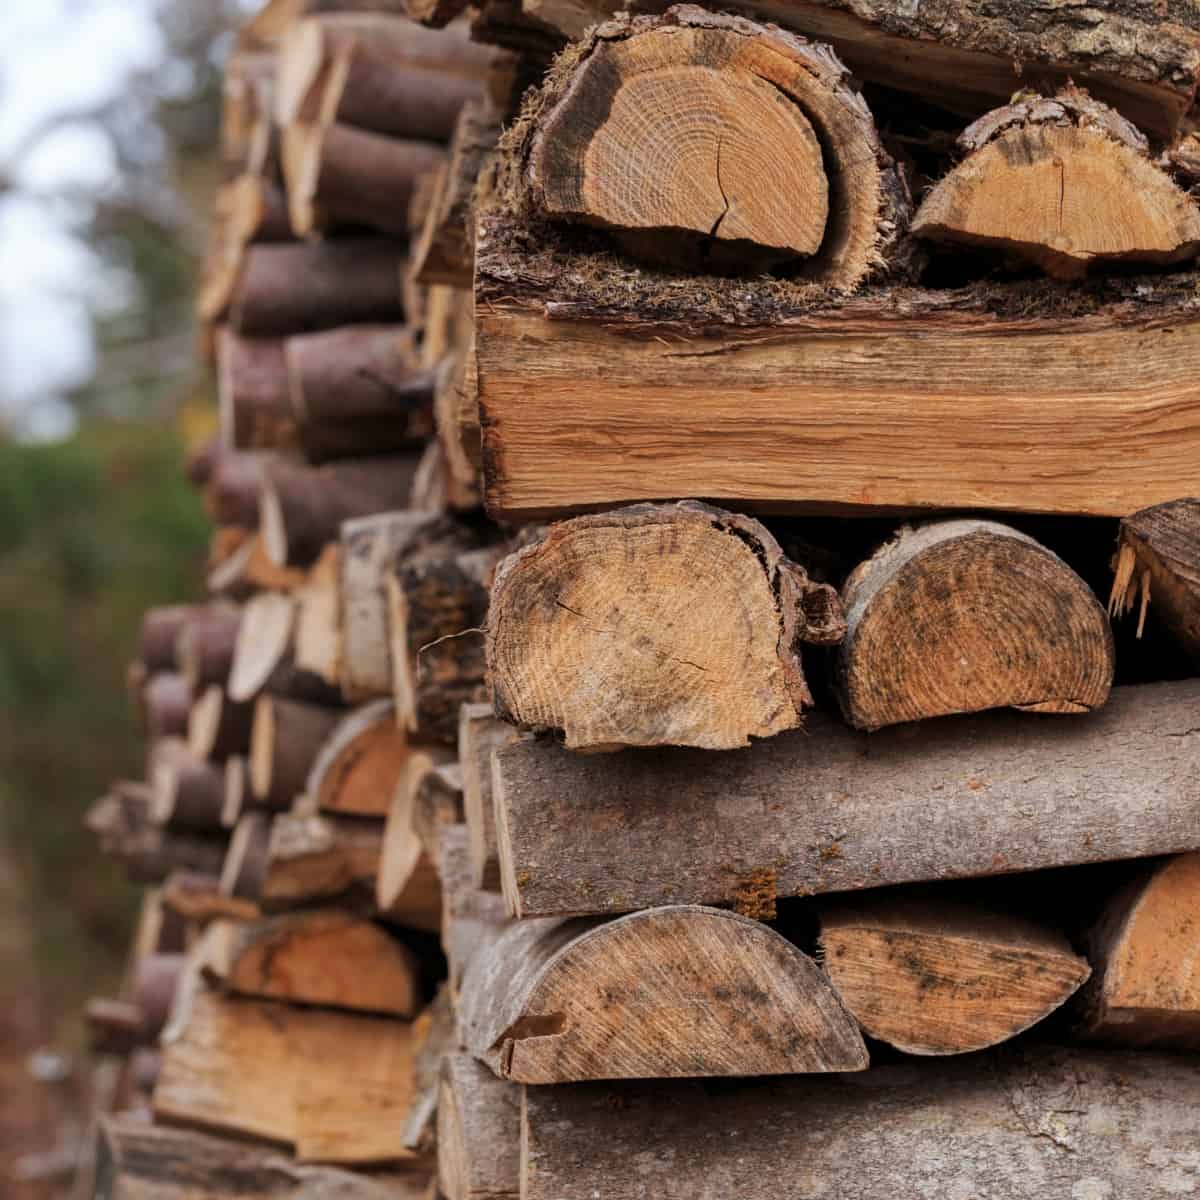 What is firewood